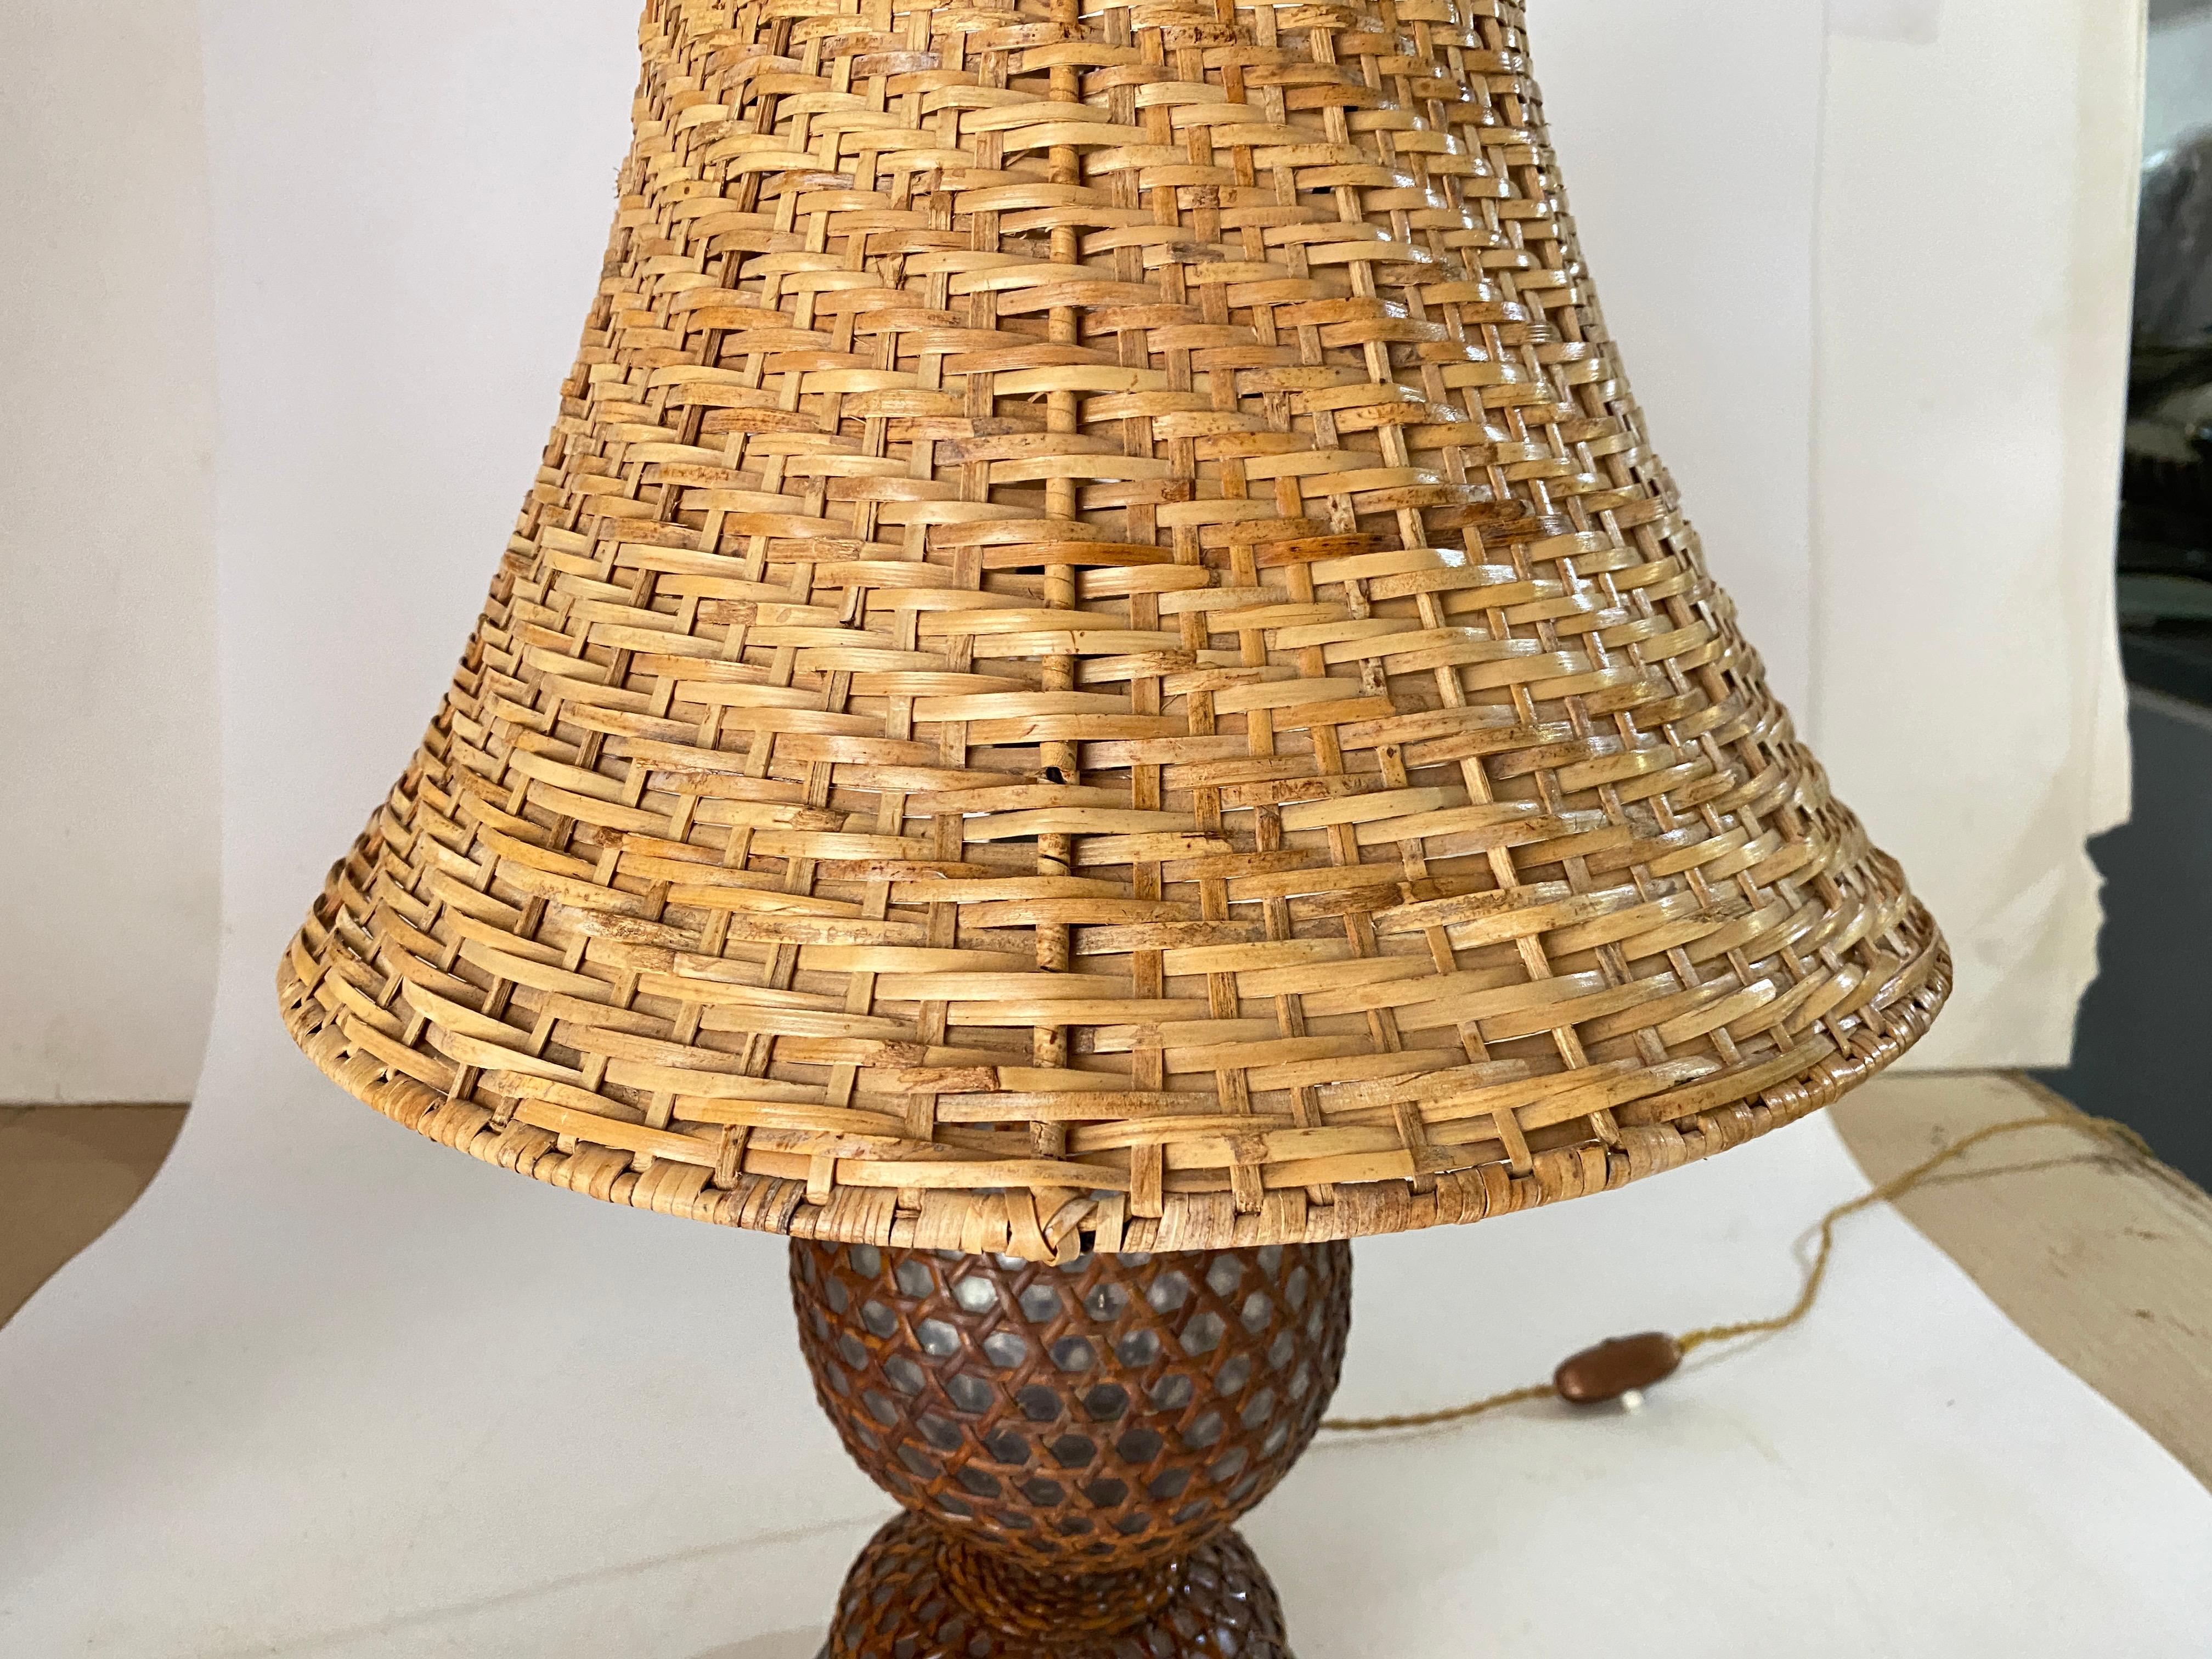 Glass and Rattan Table Lamp, Made in England, Brown Color, Circa 1970 For Sale 7